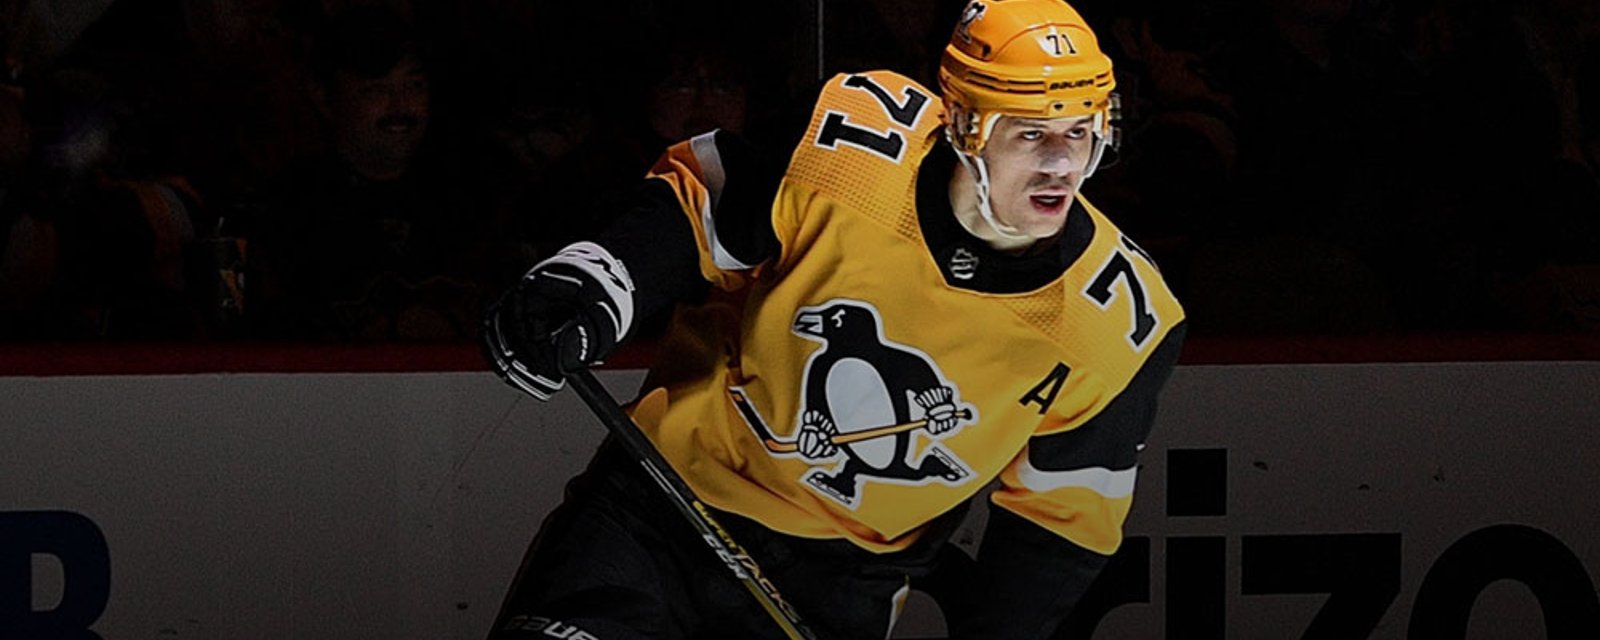 Report: Malkin reportedly demanded trade from Penguins